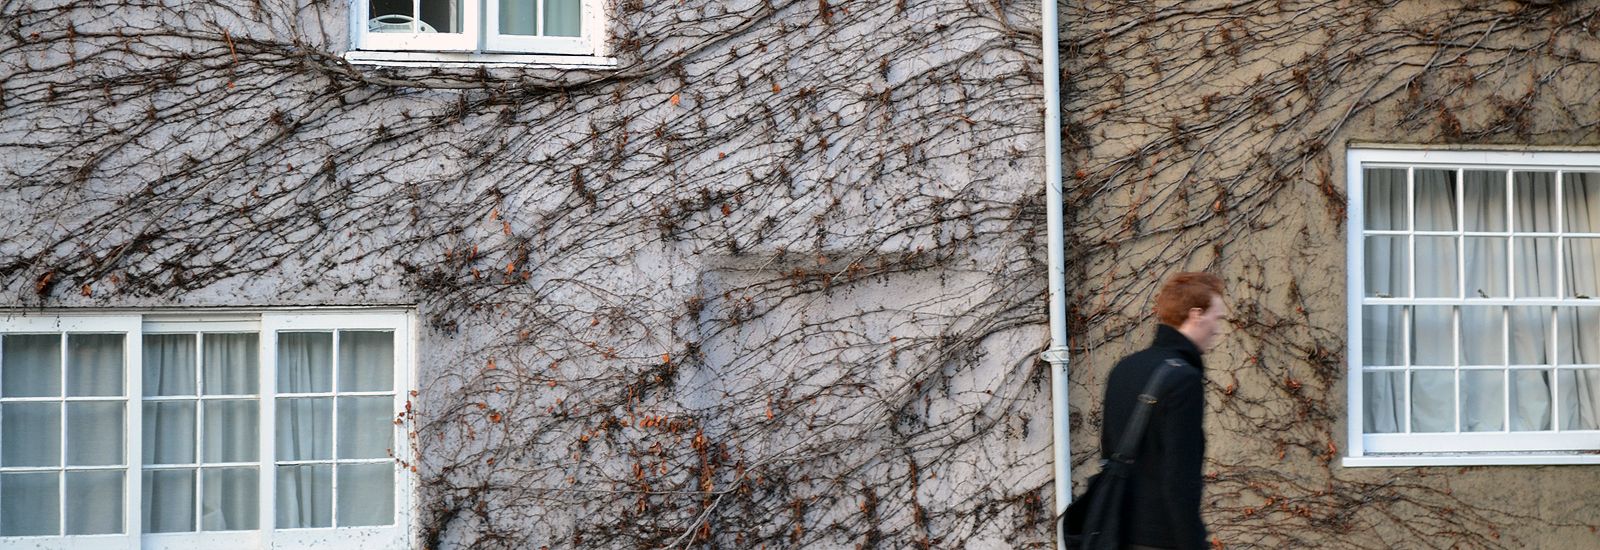 A person walking past a building covered in vines in winter 